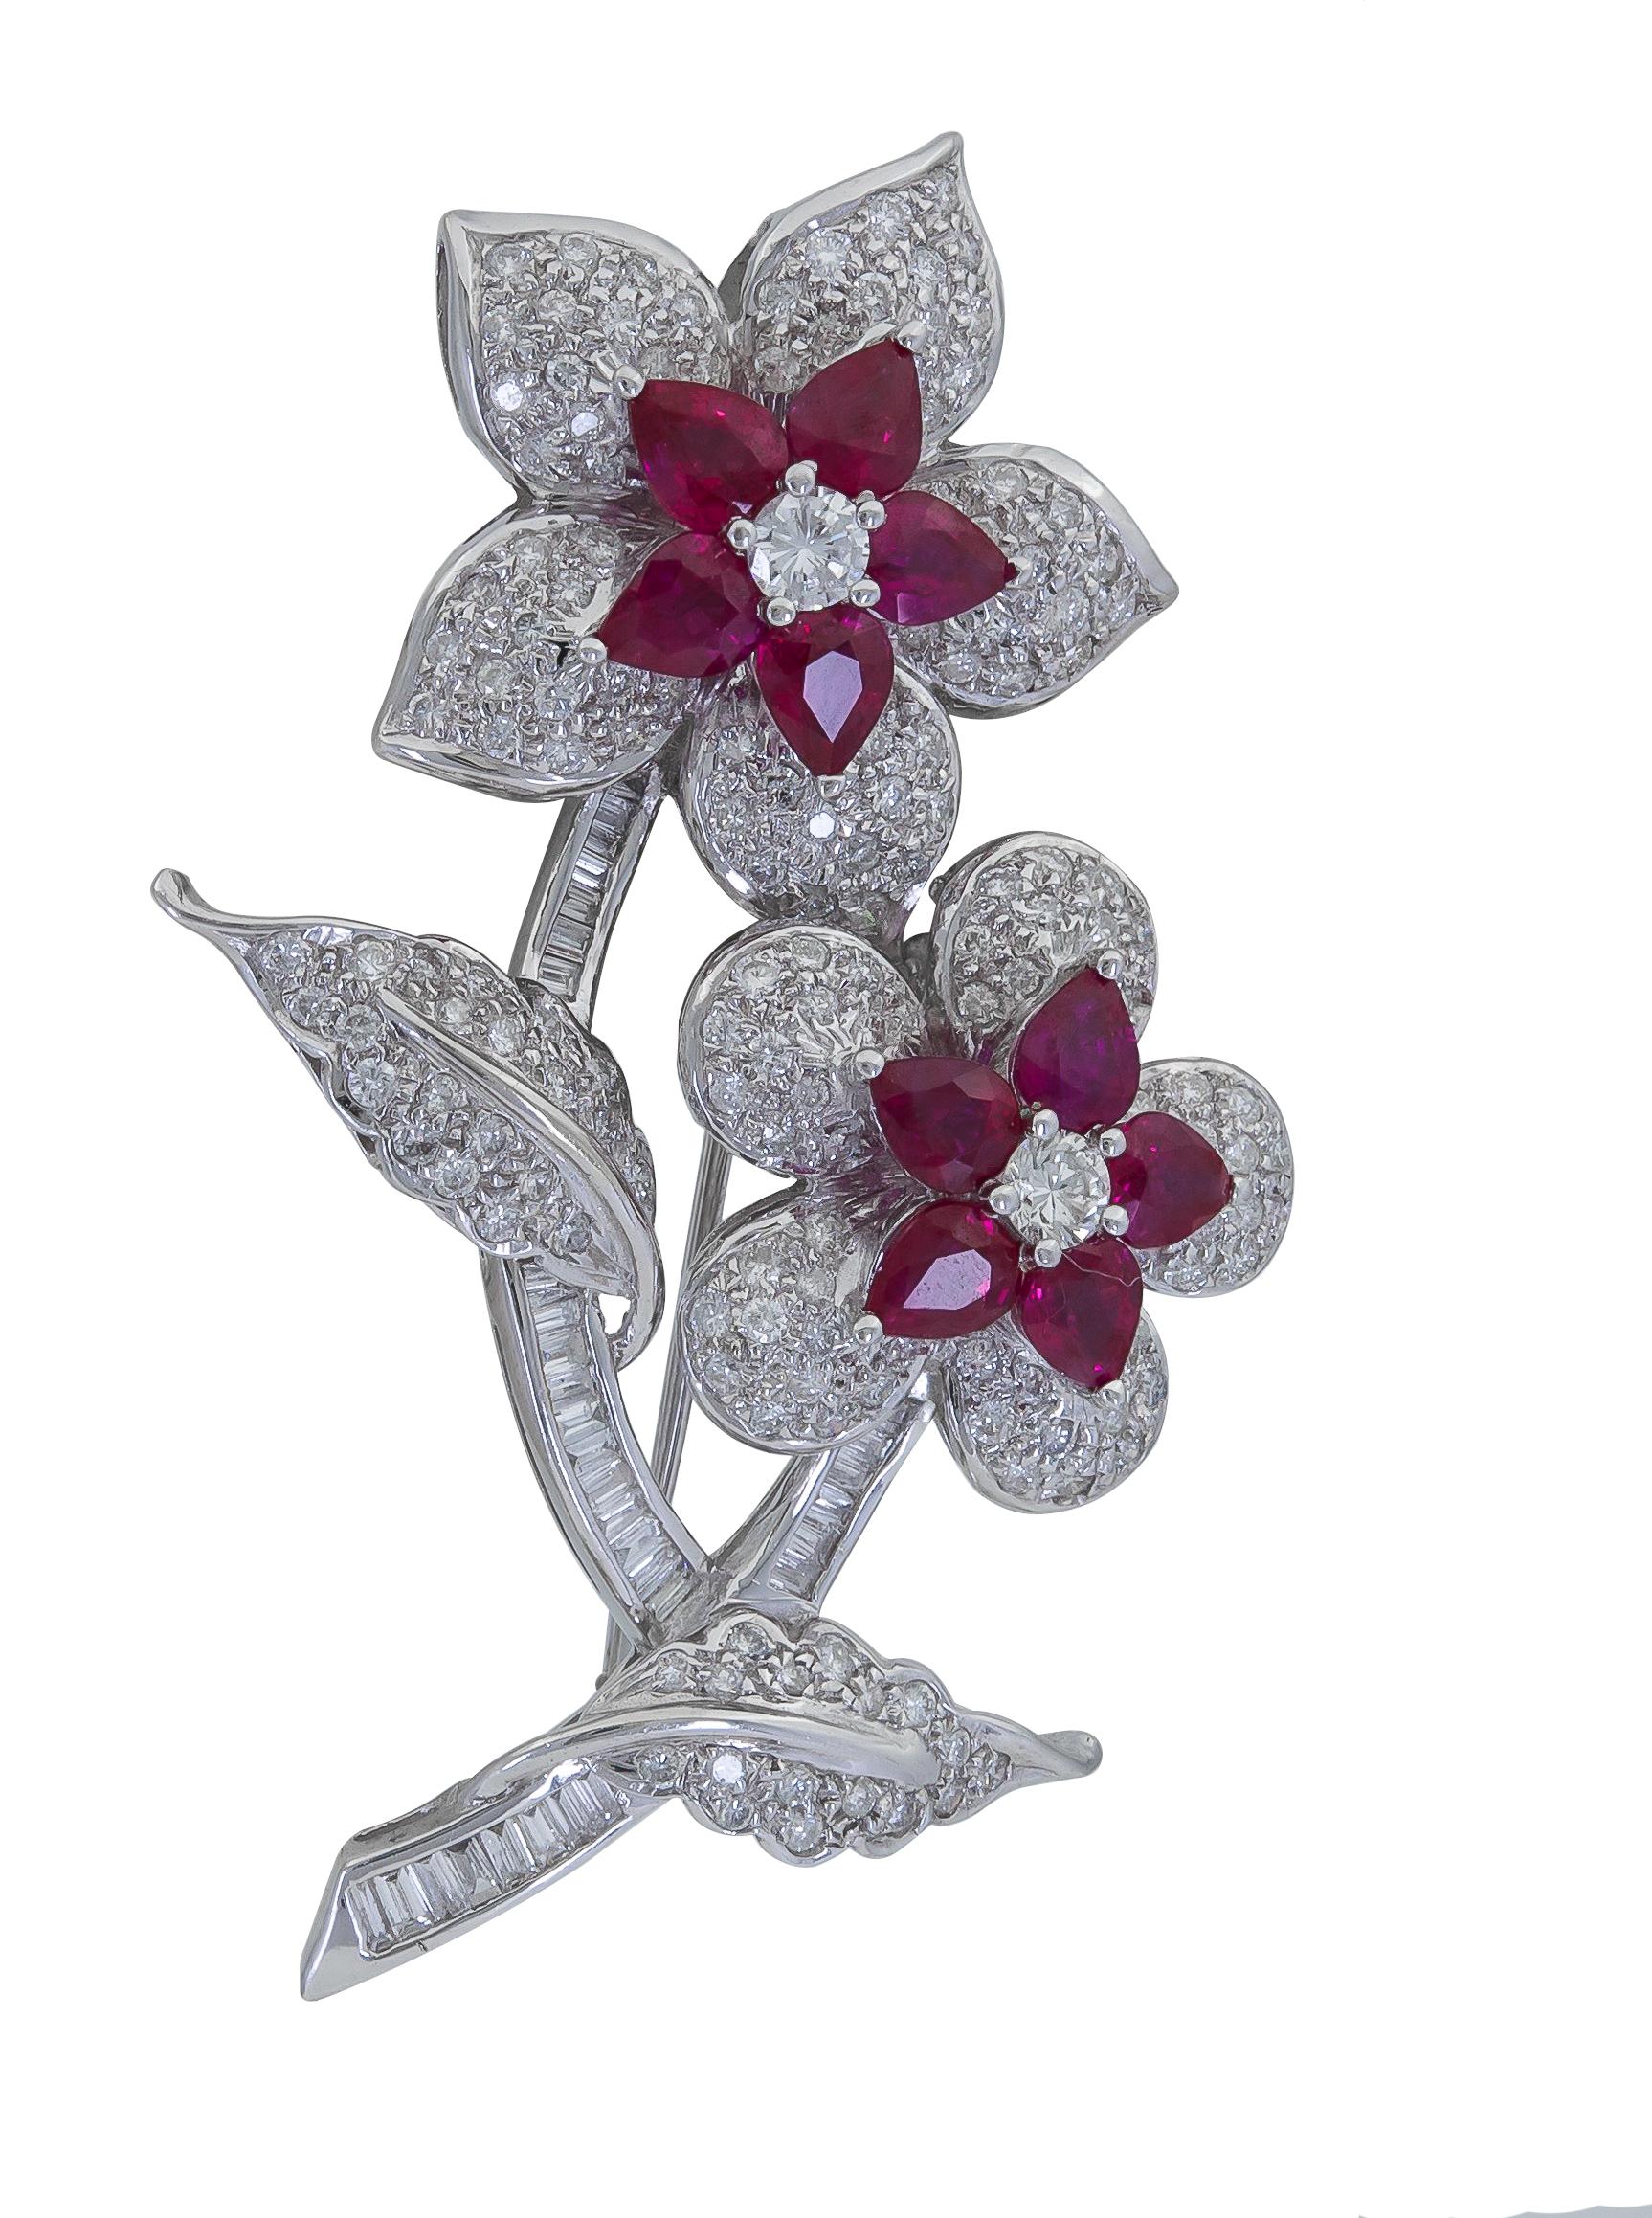 An expertly-crafted brooch featuring a combination of pear shape rubies and round brilliant diamonds arranged in a beautiful floral motif. 
Rubies weigh approximately 4.00 carats total.
Diamonds weigh approximately 4.00 carats total.
Dimensions: